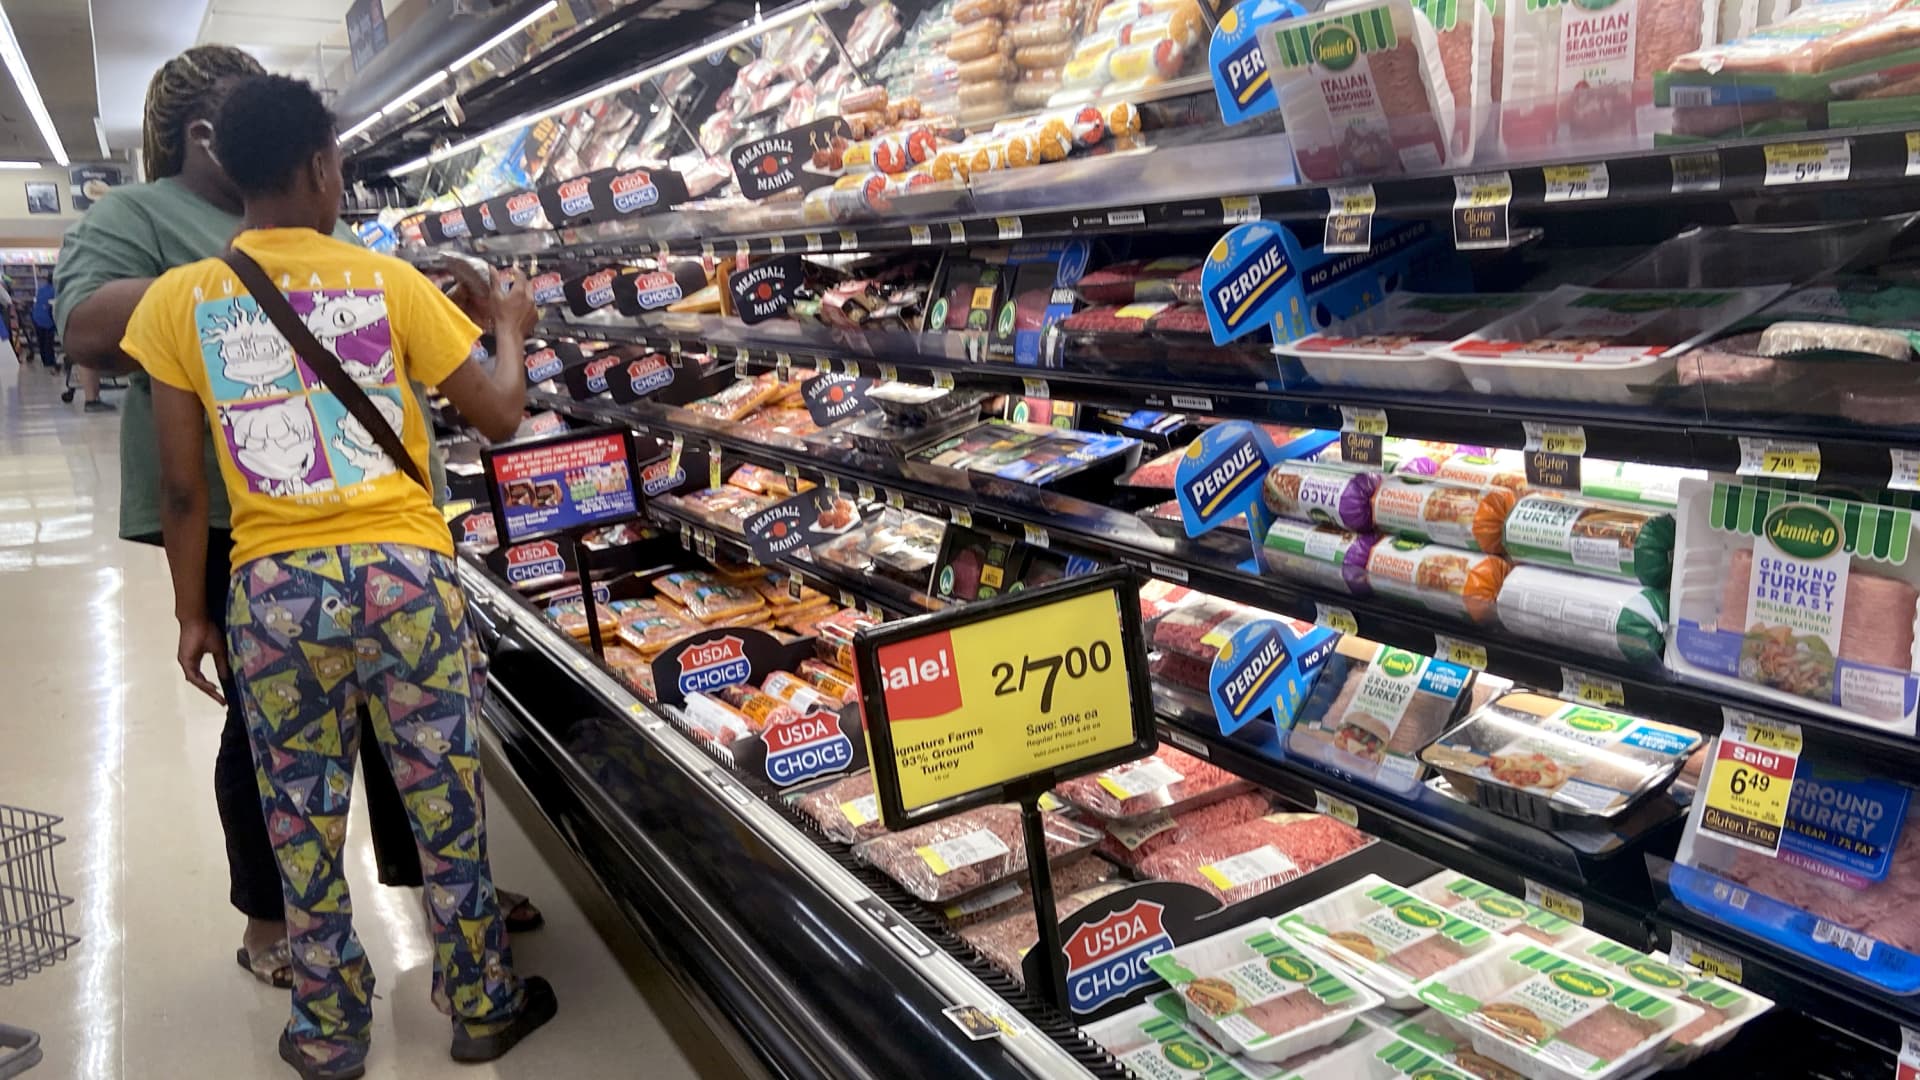 Customers shop for meat at a supermarket on June 10, 2021 in Chicago, Illinois. Inflation rose 5% in the 12-month period ending in May, the biggest jump since August 2008. Food prices rose 2.2 percent for the same period.